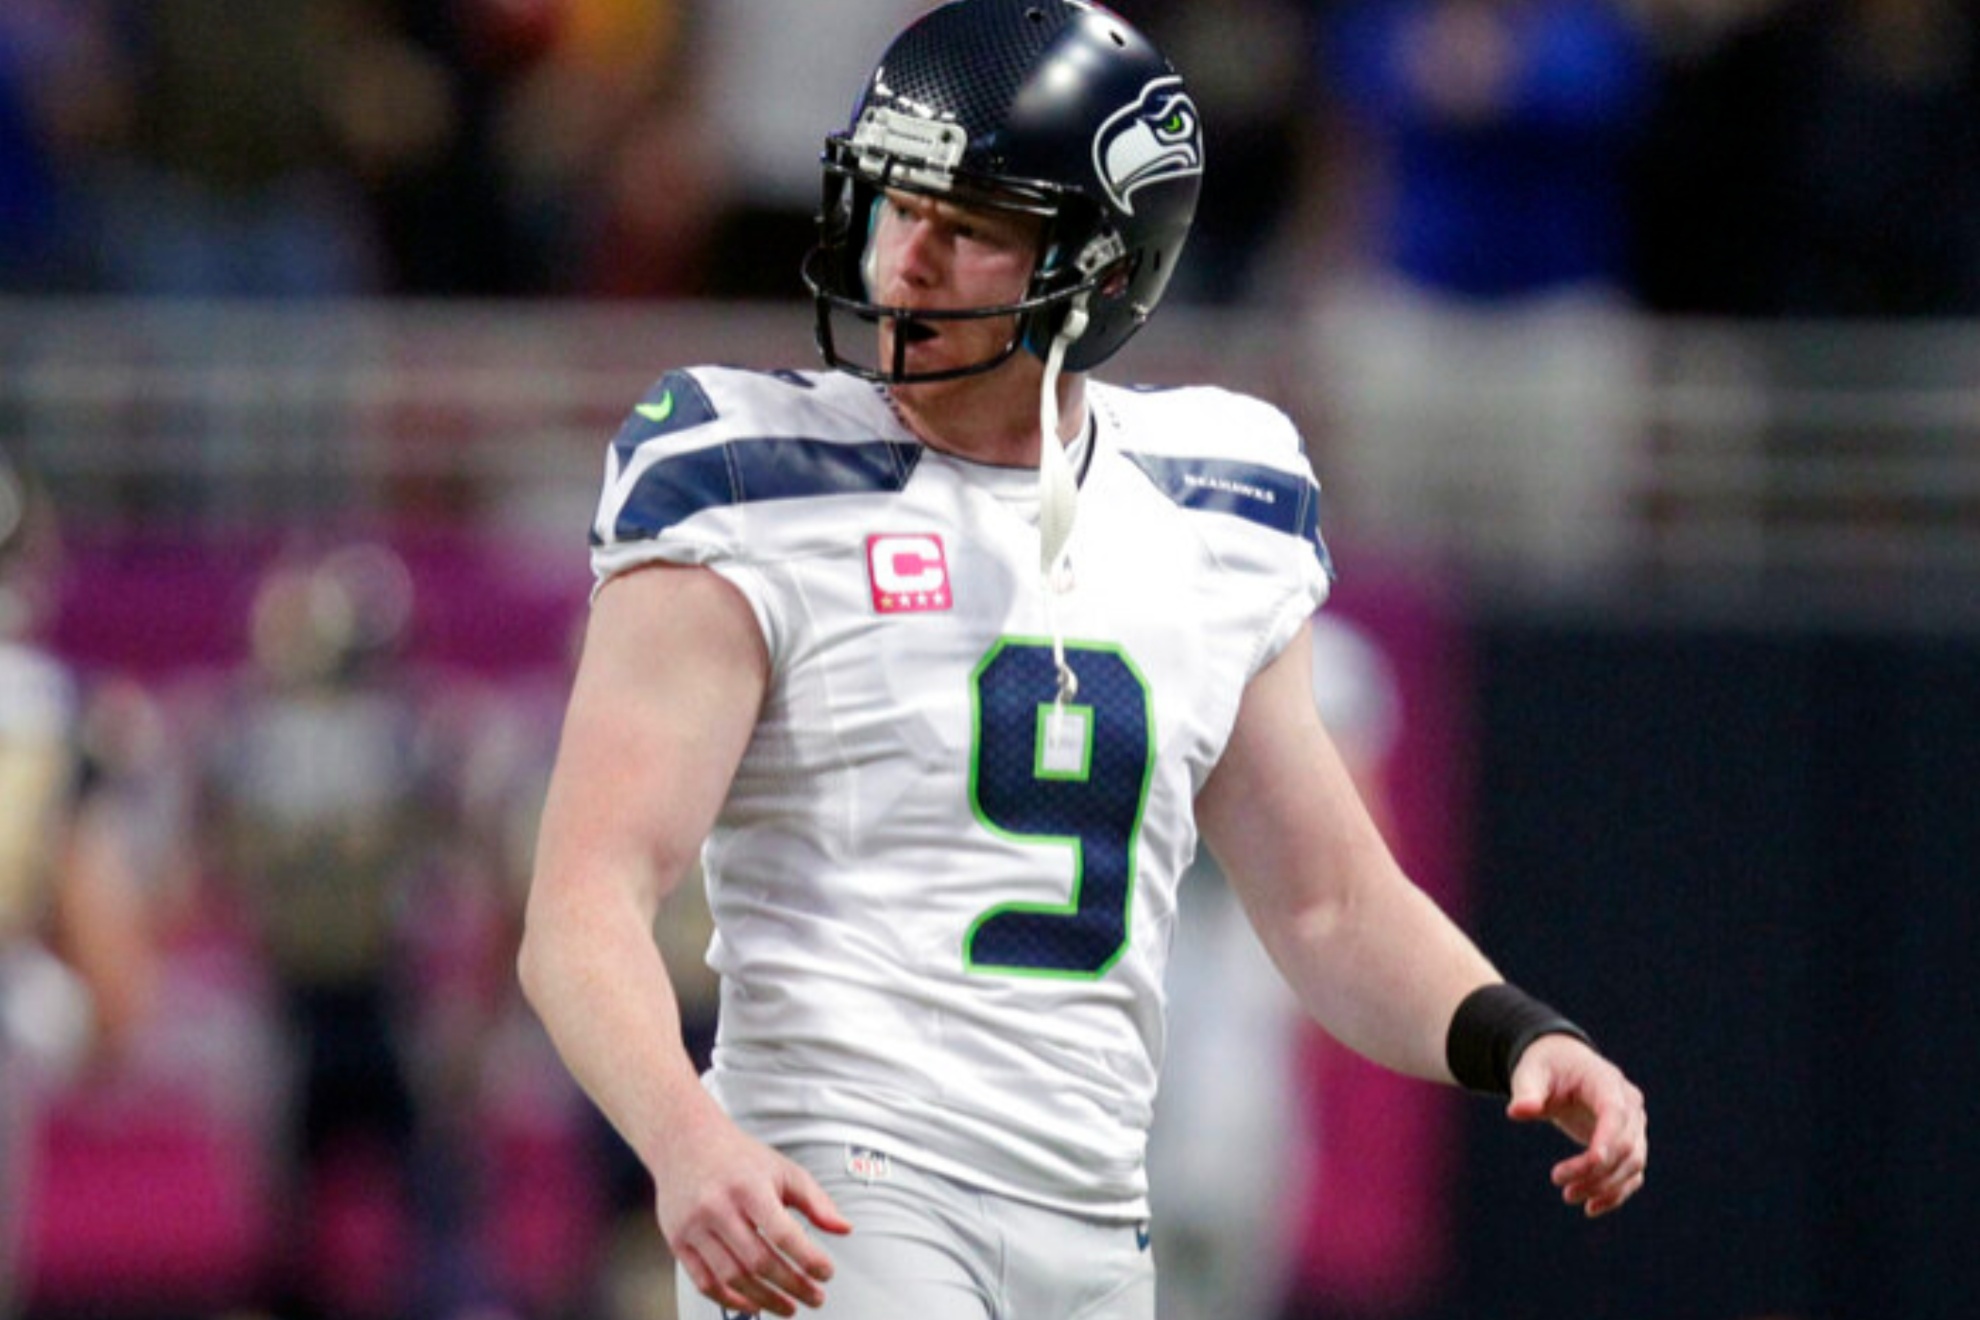 Jon Ryan was a punter for the Seattle Seahawks from 2008 through 2017